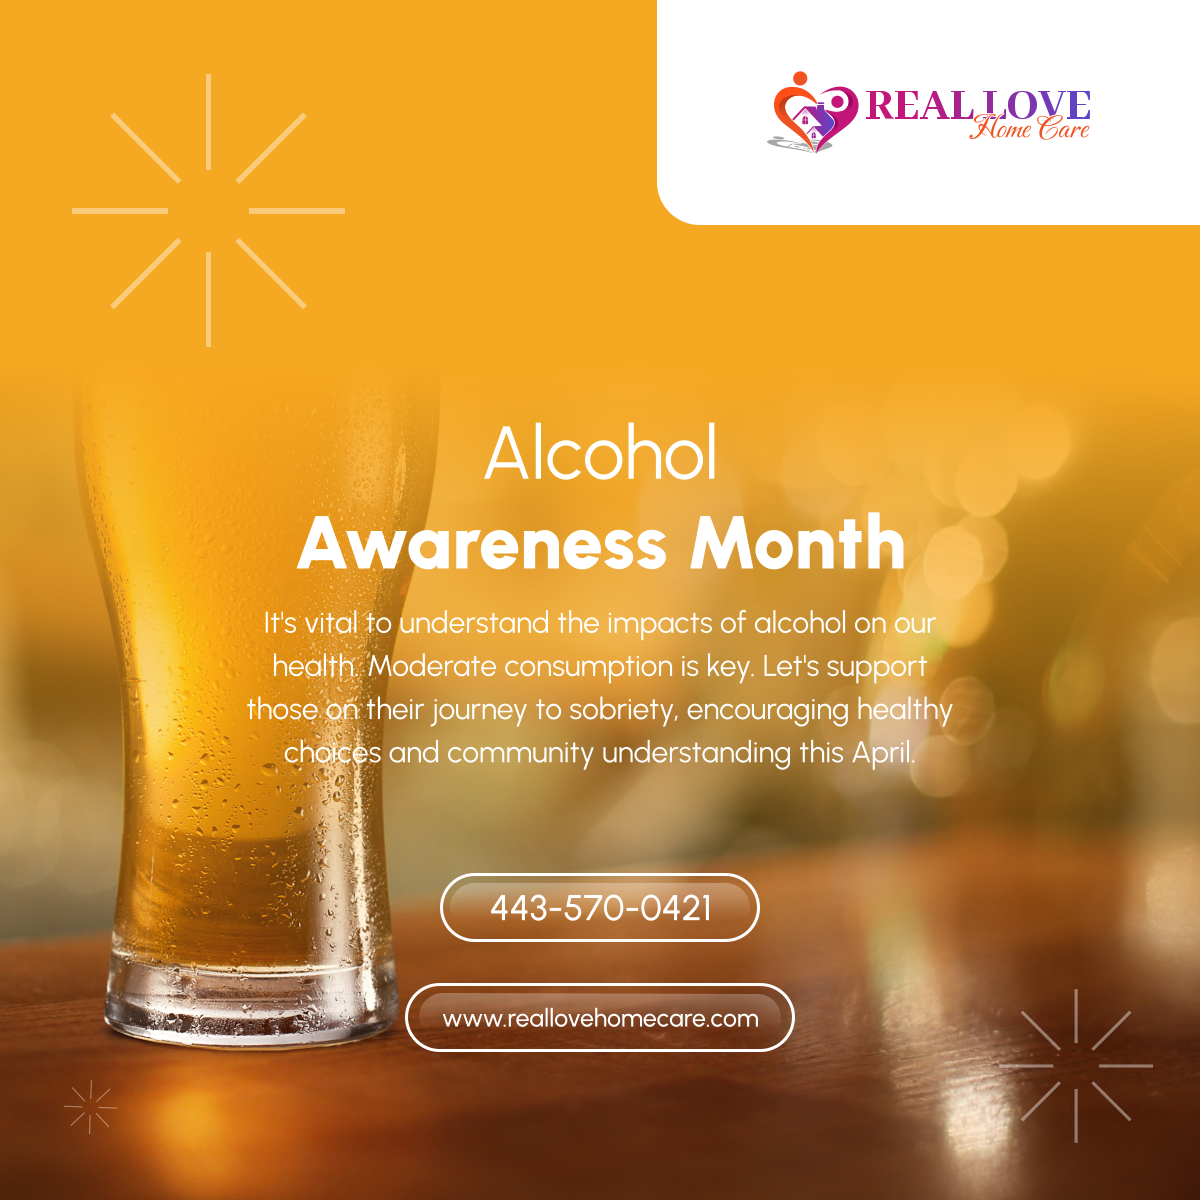 Let's raise awareness about the effects of alcohol on health and champion moderation and support for sobriety, fostering a community committed to healthy choices. Join us in observing Alcohol Awareness Month this April.

#AlcoholAwarenessMonth #SobrietySupport #HealthFirst